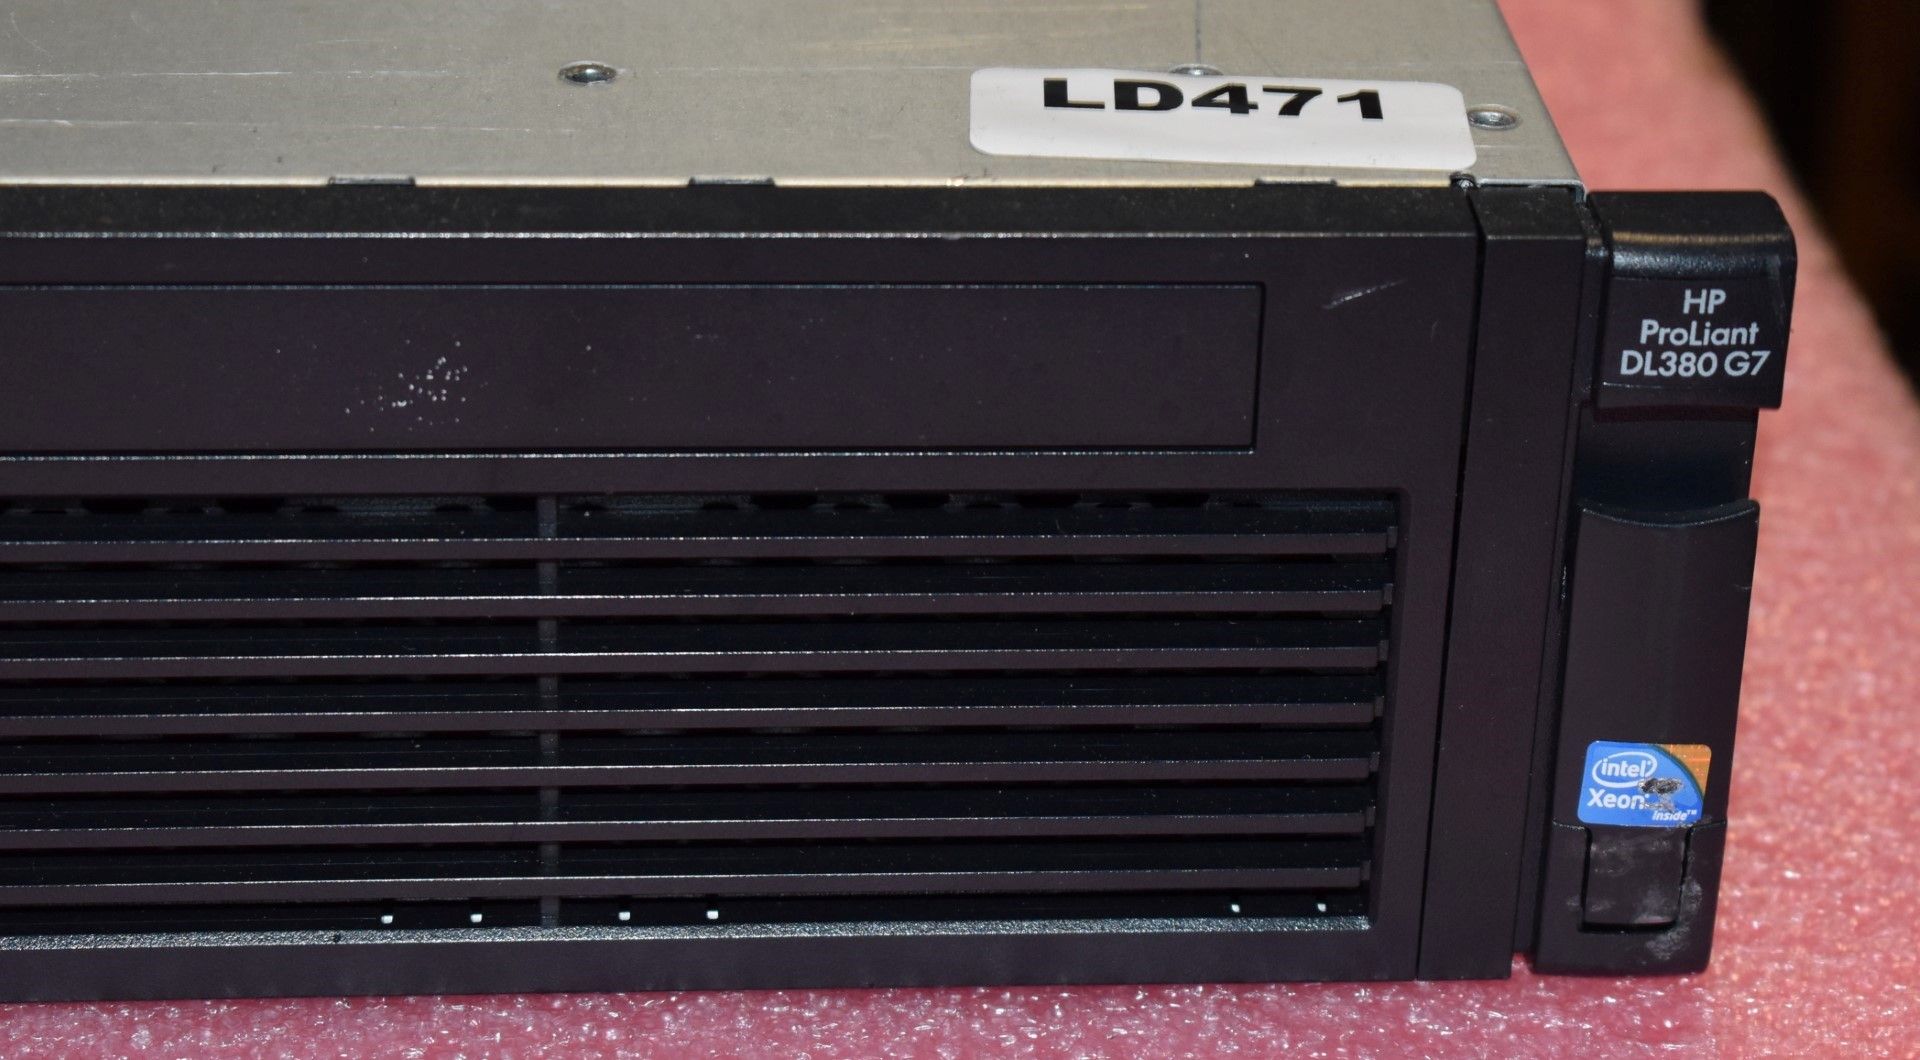 1 x HP ProLiant DL380 G7 Server With 2 x Intel Xeon X5650 Six Core 3.06ghz Processors and 92gb Ram - - Image 2 of 8